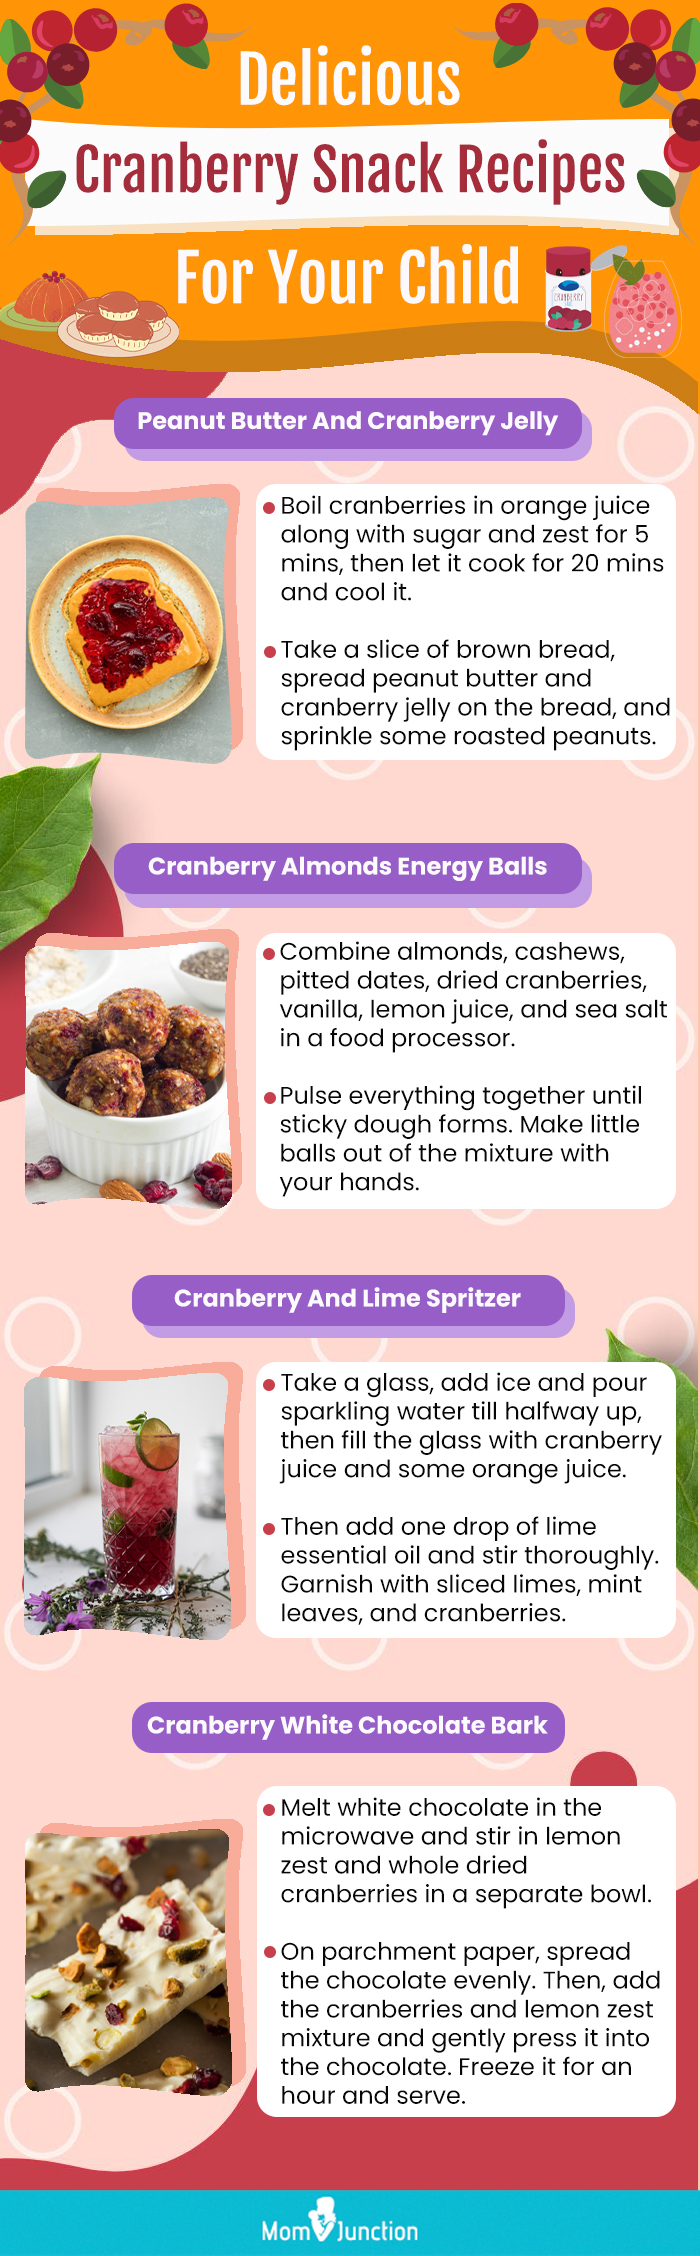 delicious cranberry snack recipes for your child (infographic)